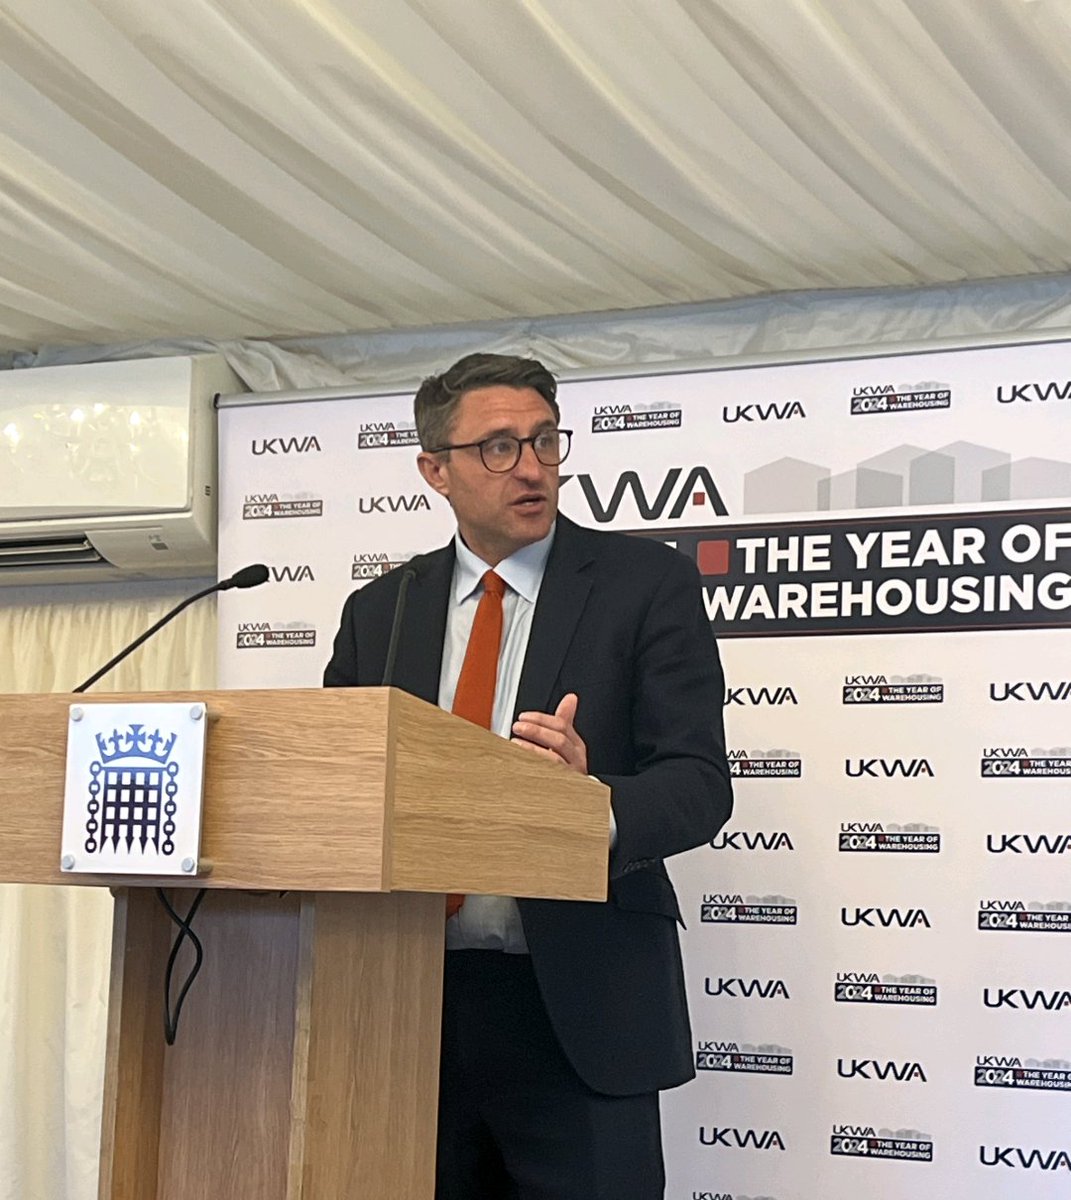 Great to host @UKWarehousing in Parliament to celebrate their 80th birthday and 'The Year of Warehousing' Warehousing is one of the fastest growing sectors in the UK and we have a thriving warehousing sector in #MiltonKeynes with the likes of John Lewis, Bakro and Makita.